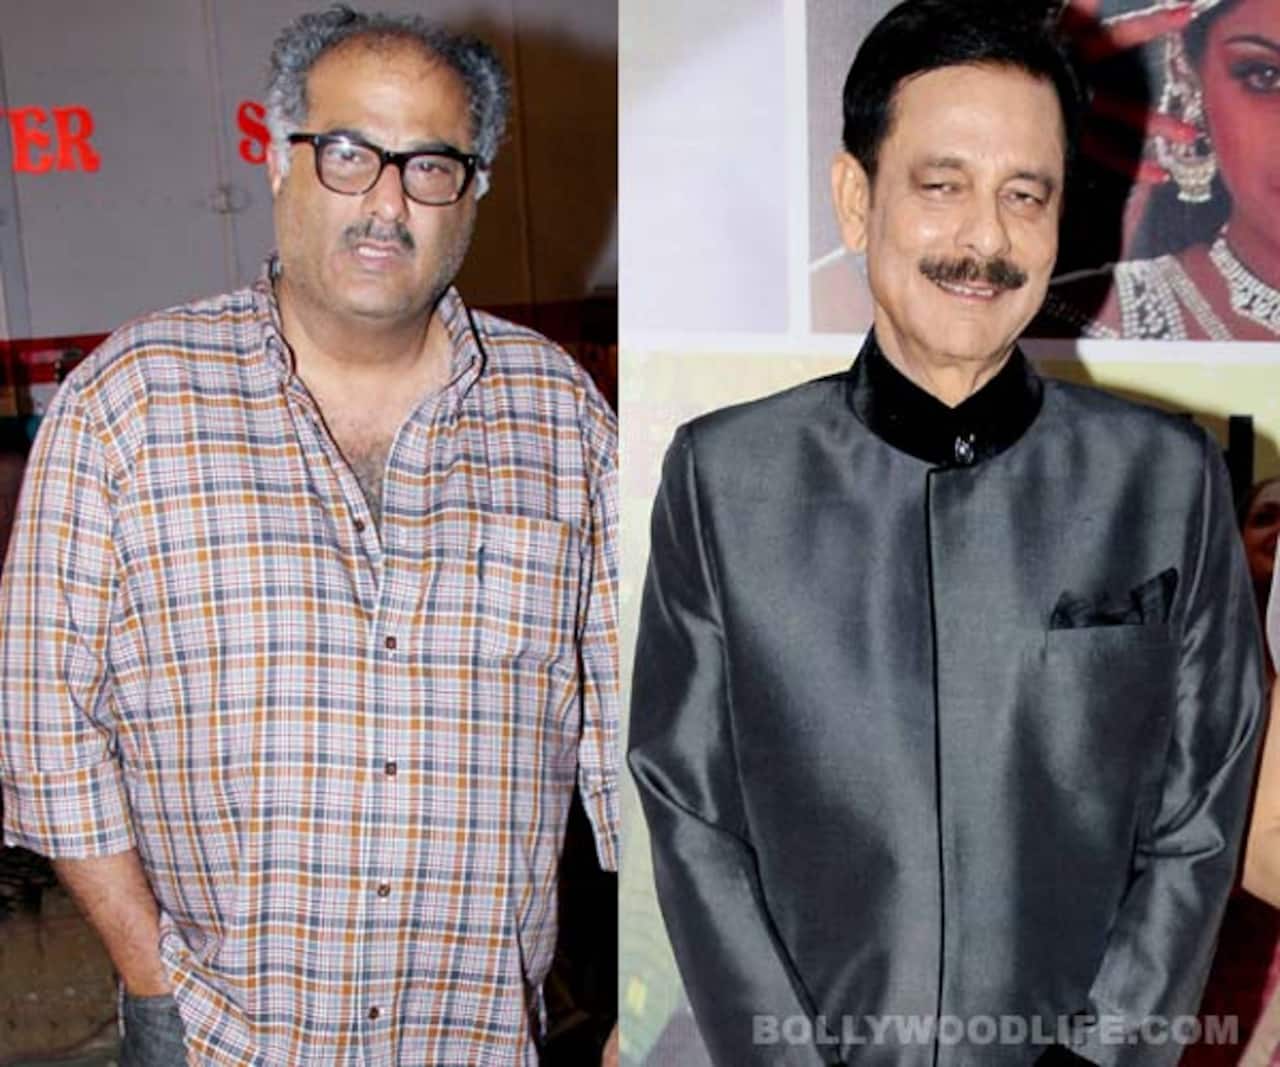 Will Boney Kapoor be thrown out of his own property by Subrata Roy?